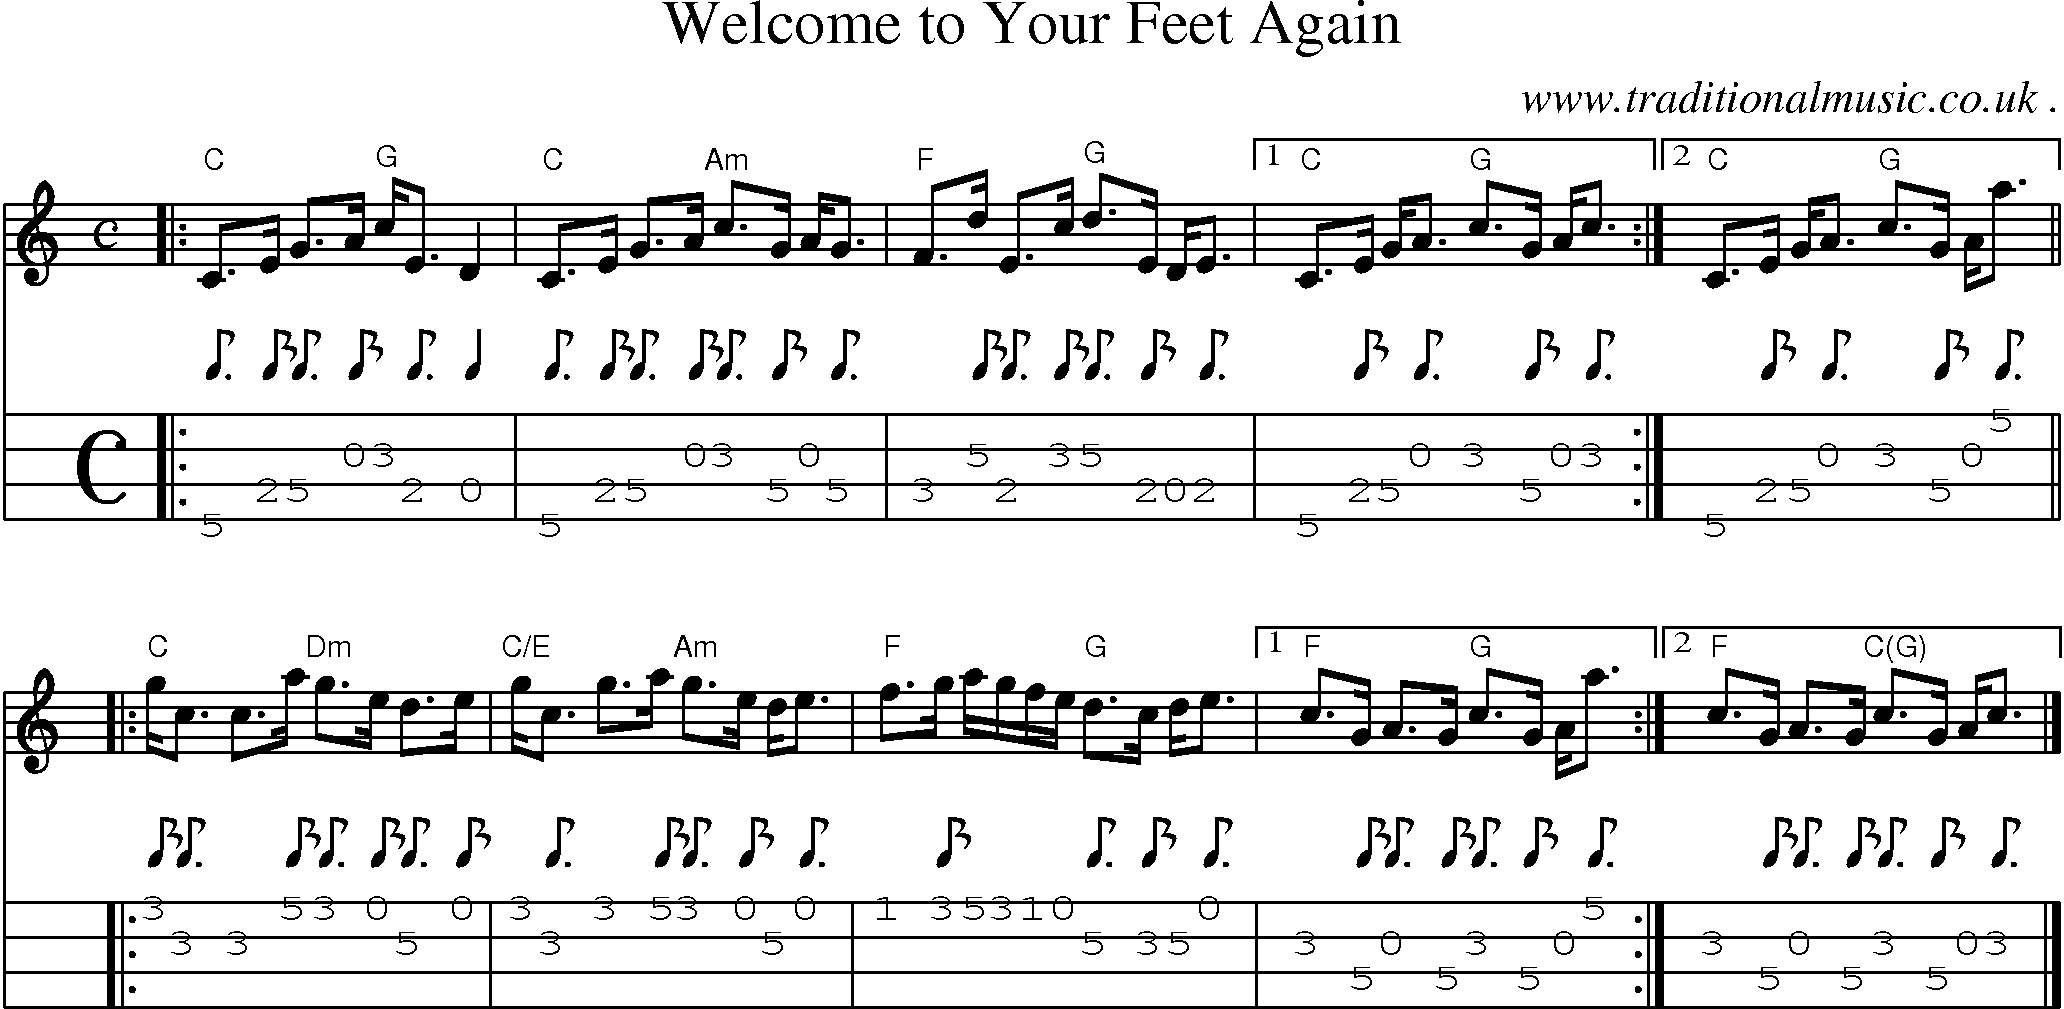 Sheet-music  score, Chords and Mandolin Tabs for Welcome To Your Feet Again